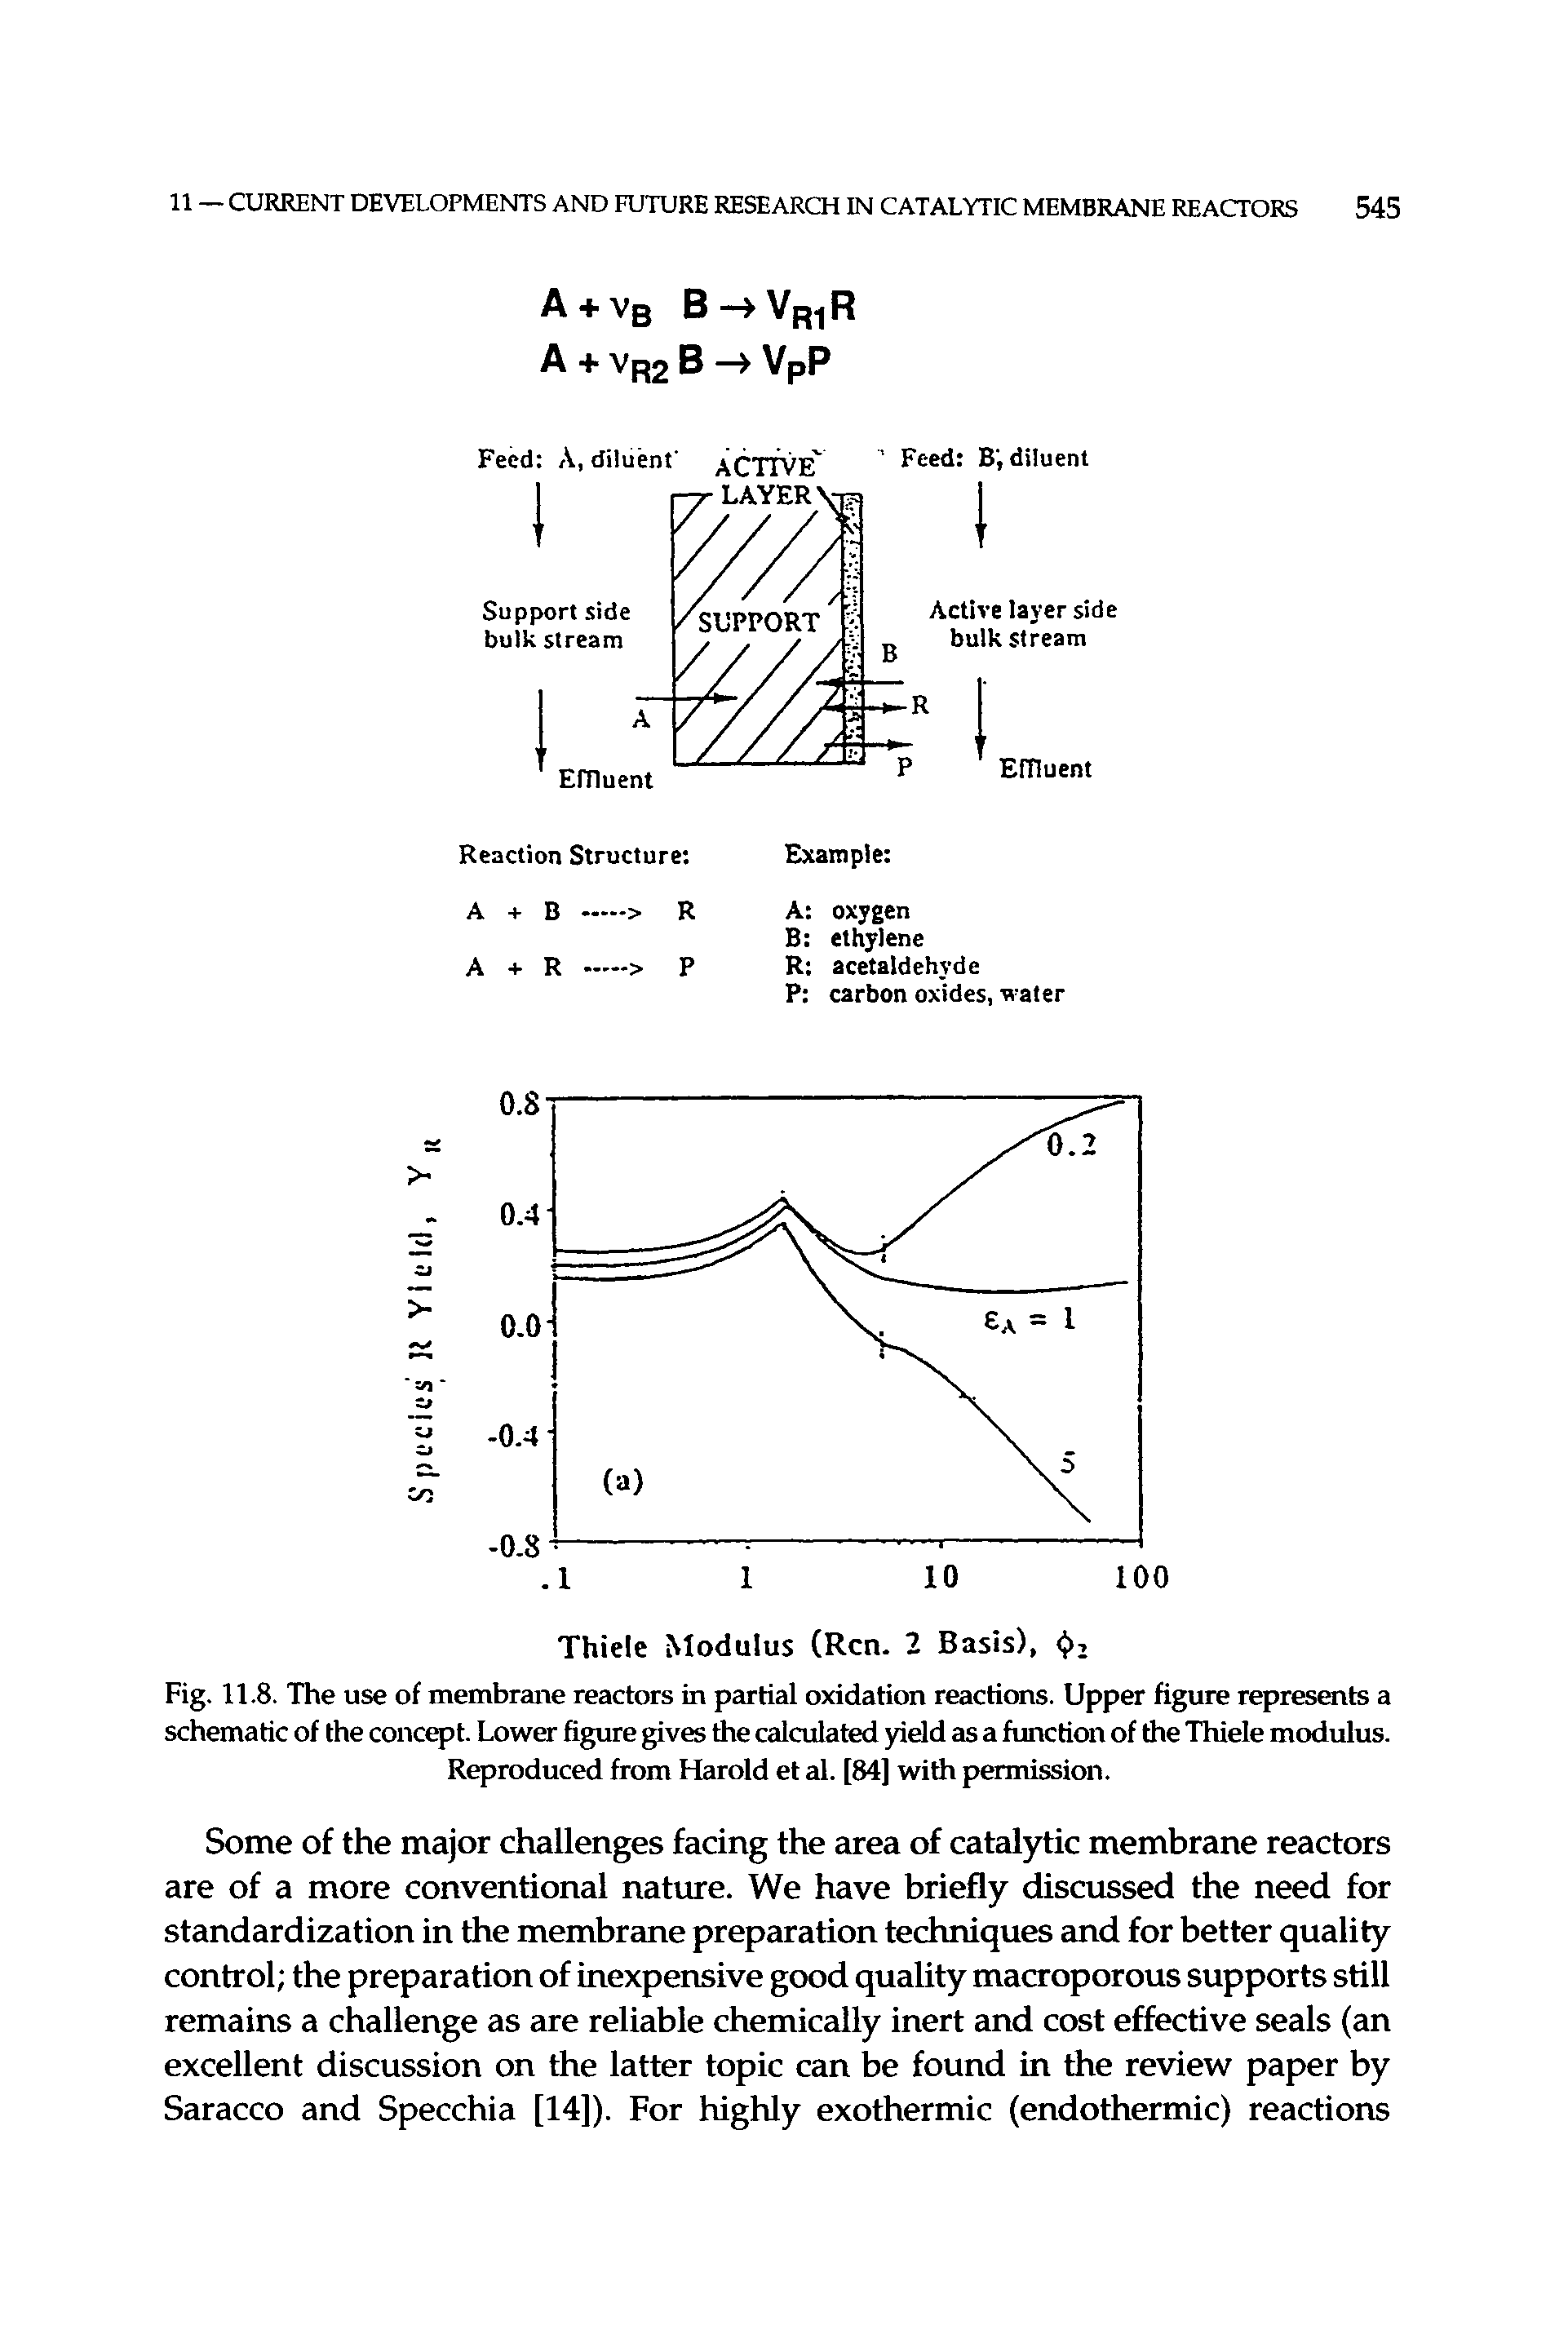 Fig. 11.8. The use of membrane reactors in partial oxidation reactions. Upper figure represents a schematic of the concept. Lower figure gives the calculated )deld as a function of the Thiele modulus.